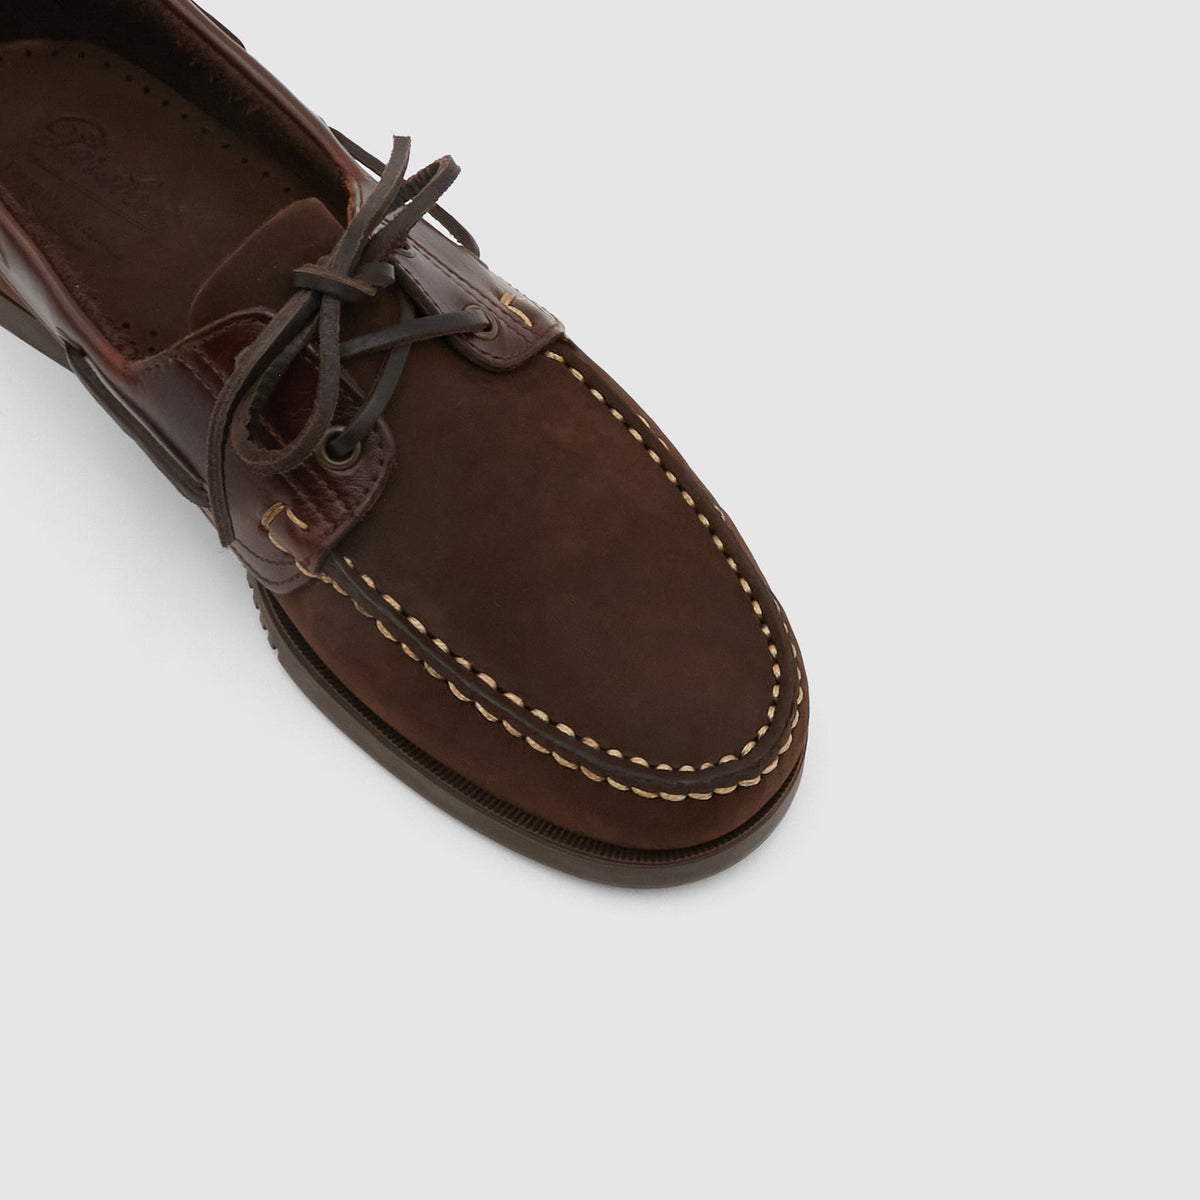 Paraboot Barth Suede - DeeCee style